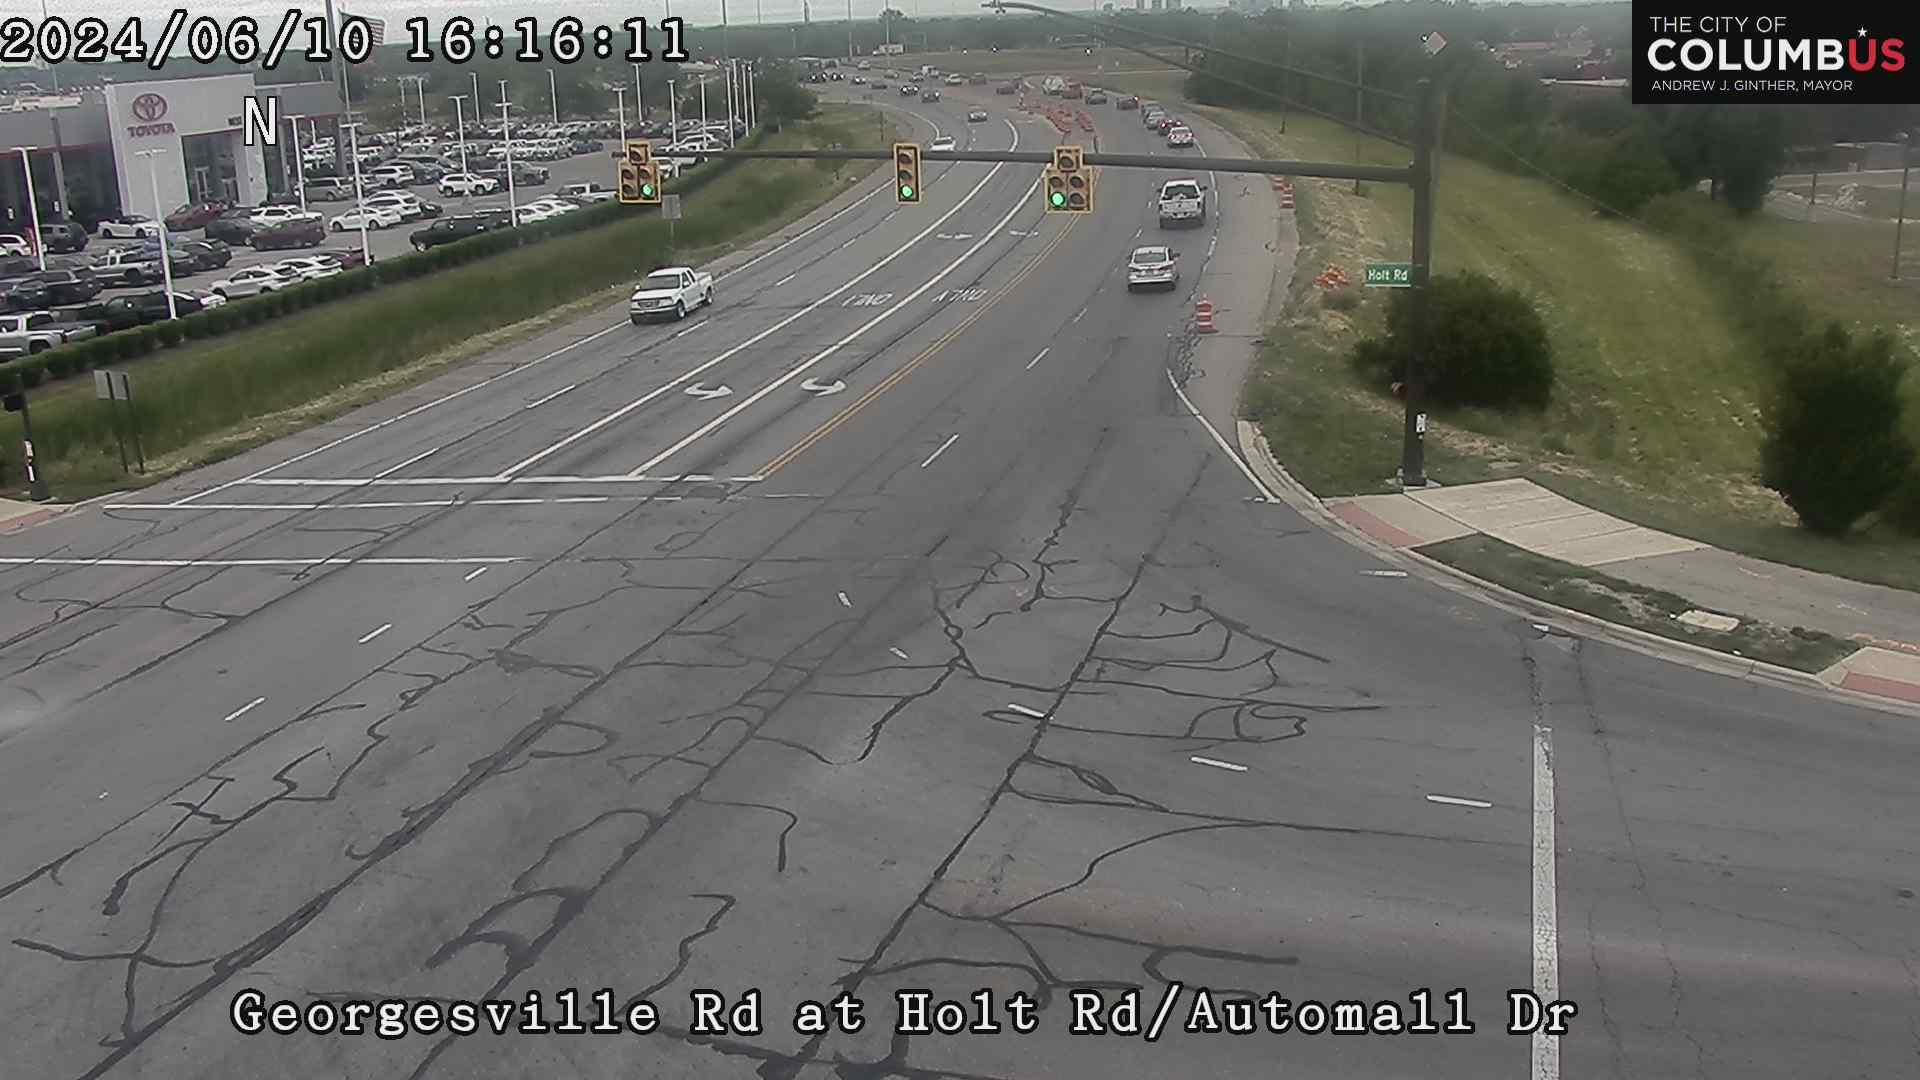 Traffic Cam Columbus: City of - Georgesville Rd at Holt Rd Player